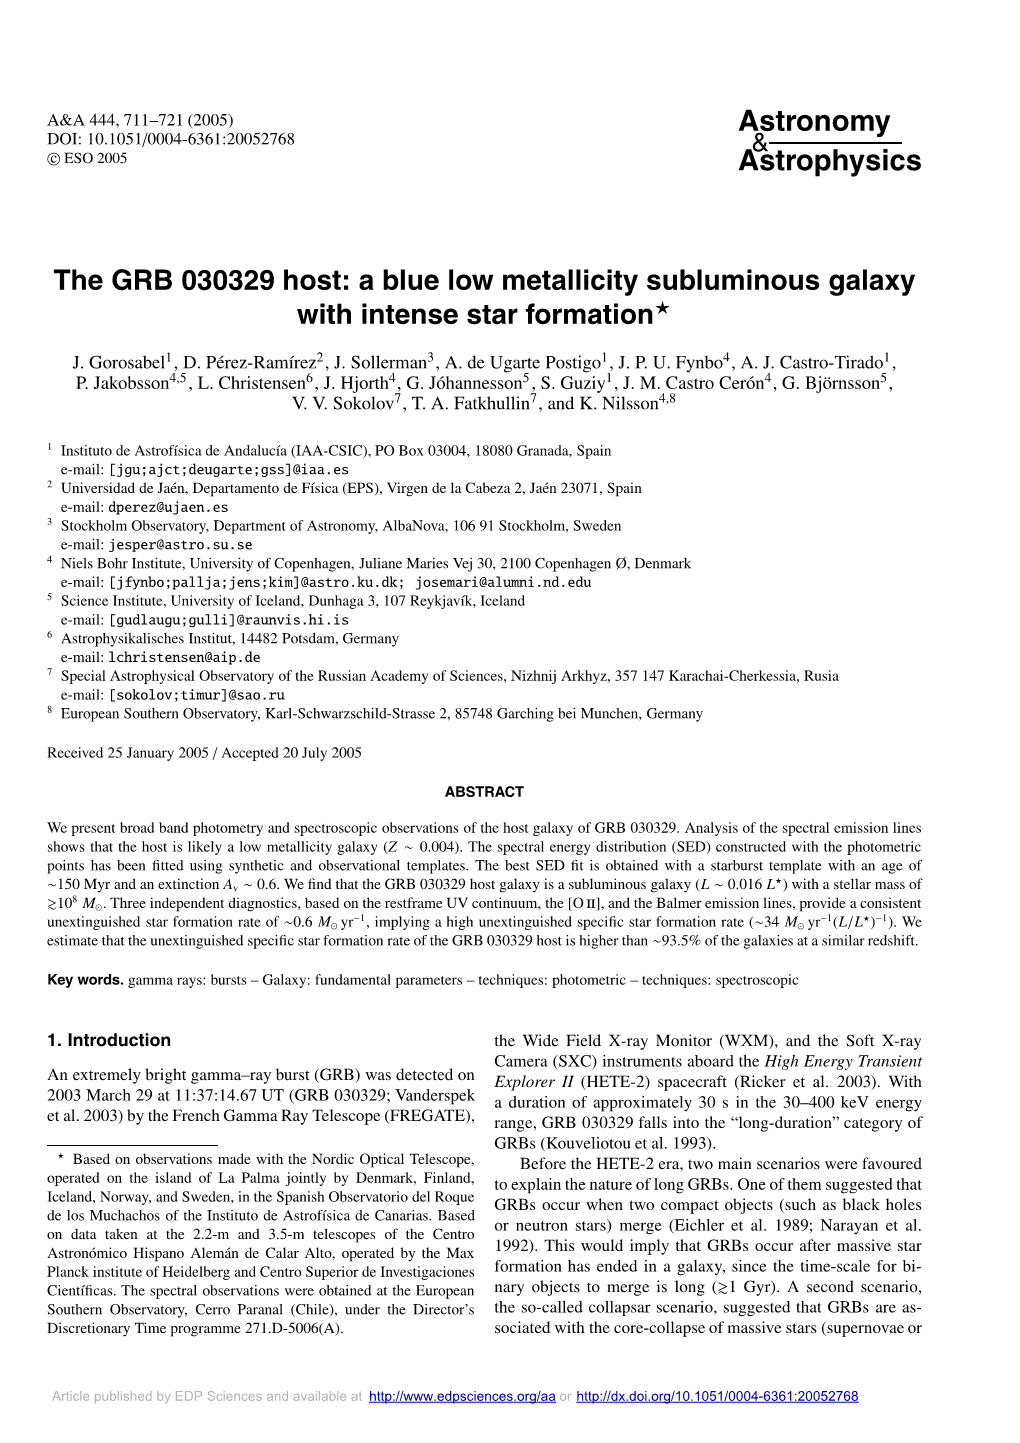 The GRB 030329 Host: a Blue Low Metallicity Subluminous Galaxy with Intense Star Formation